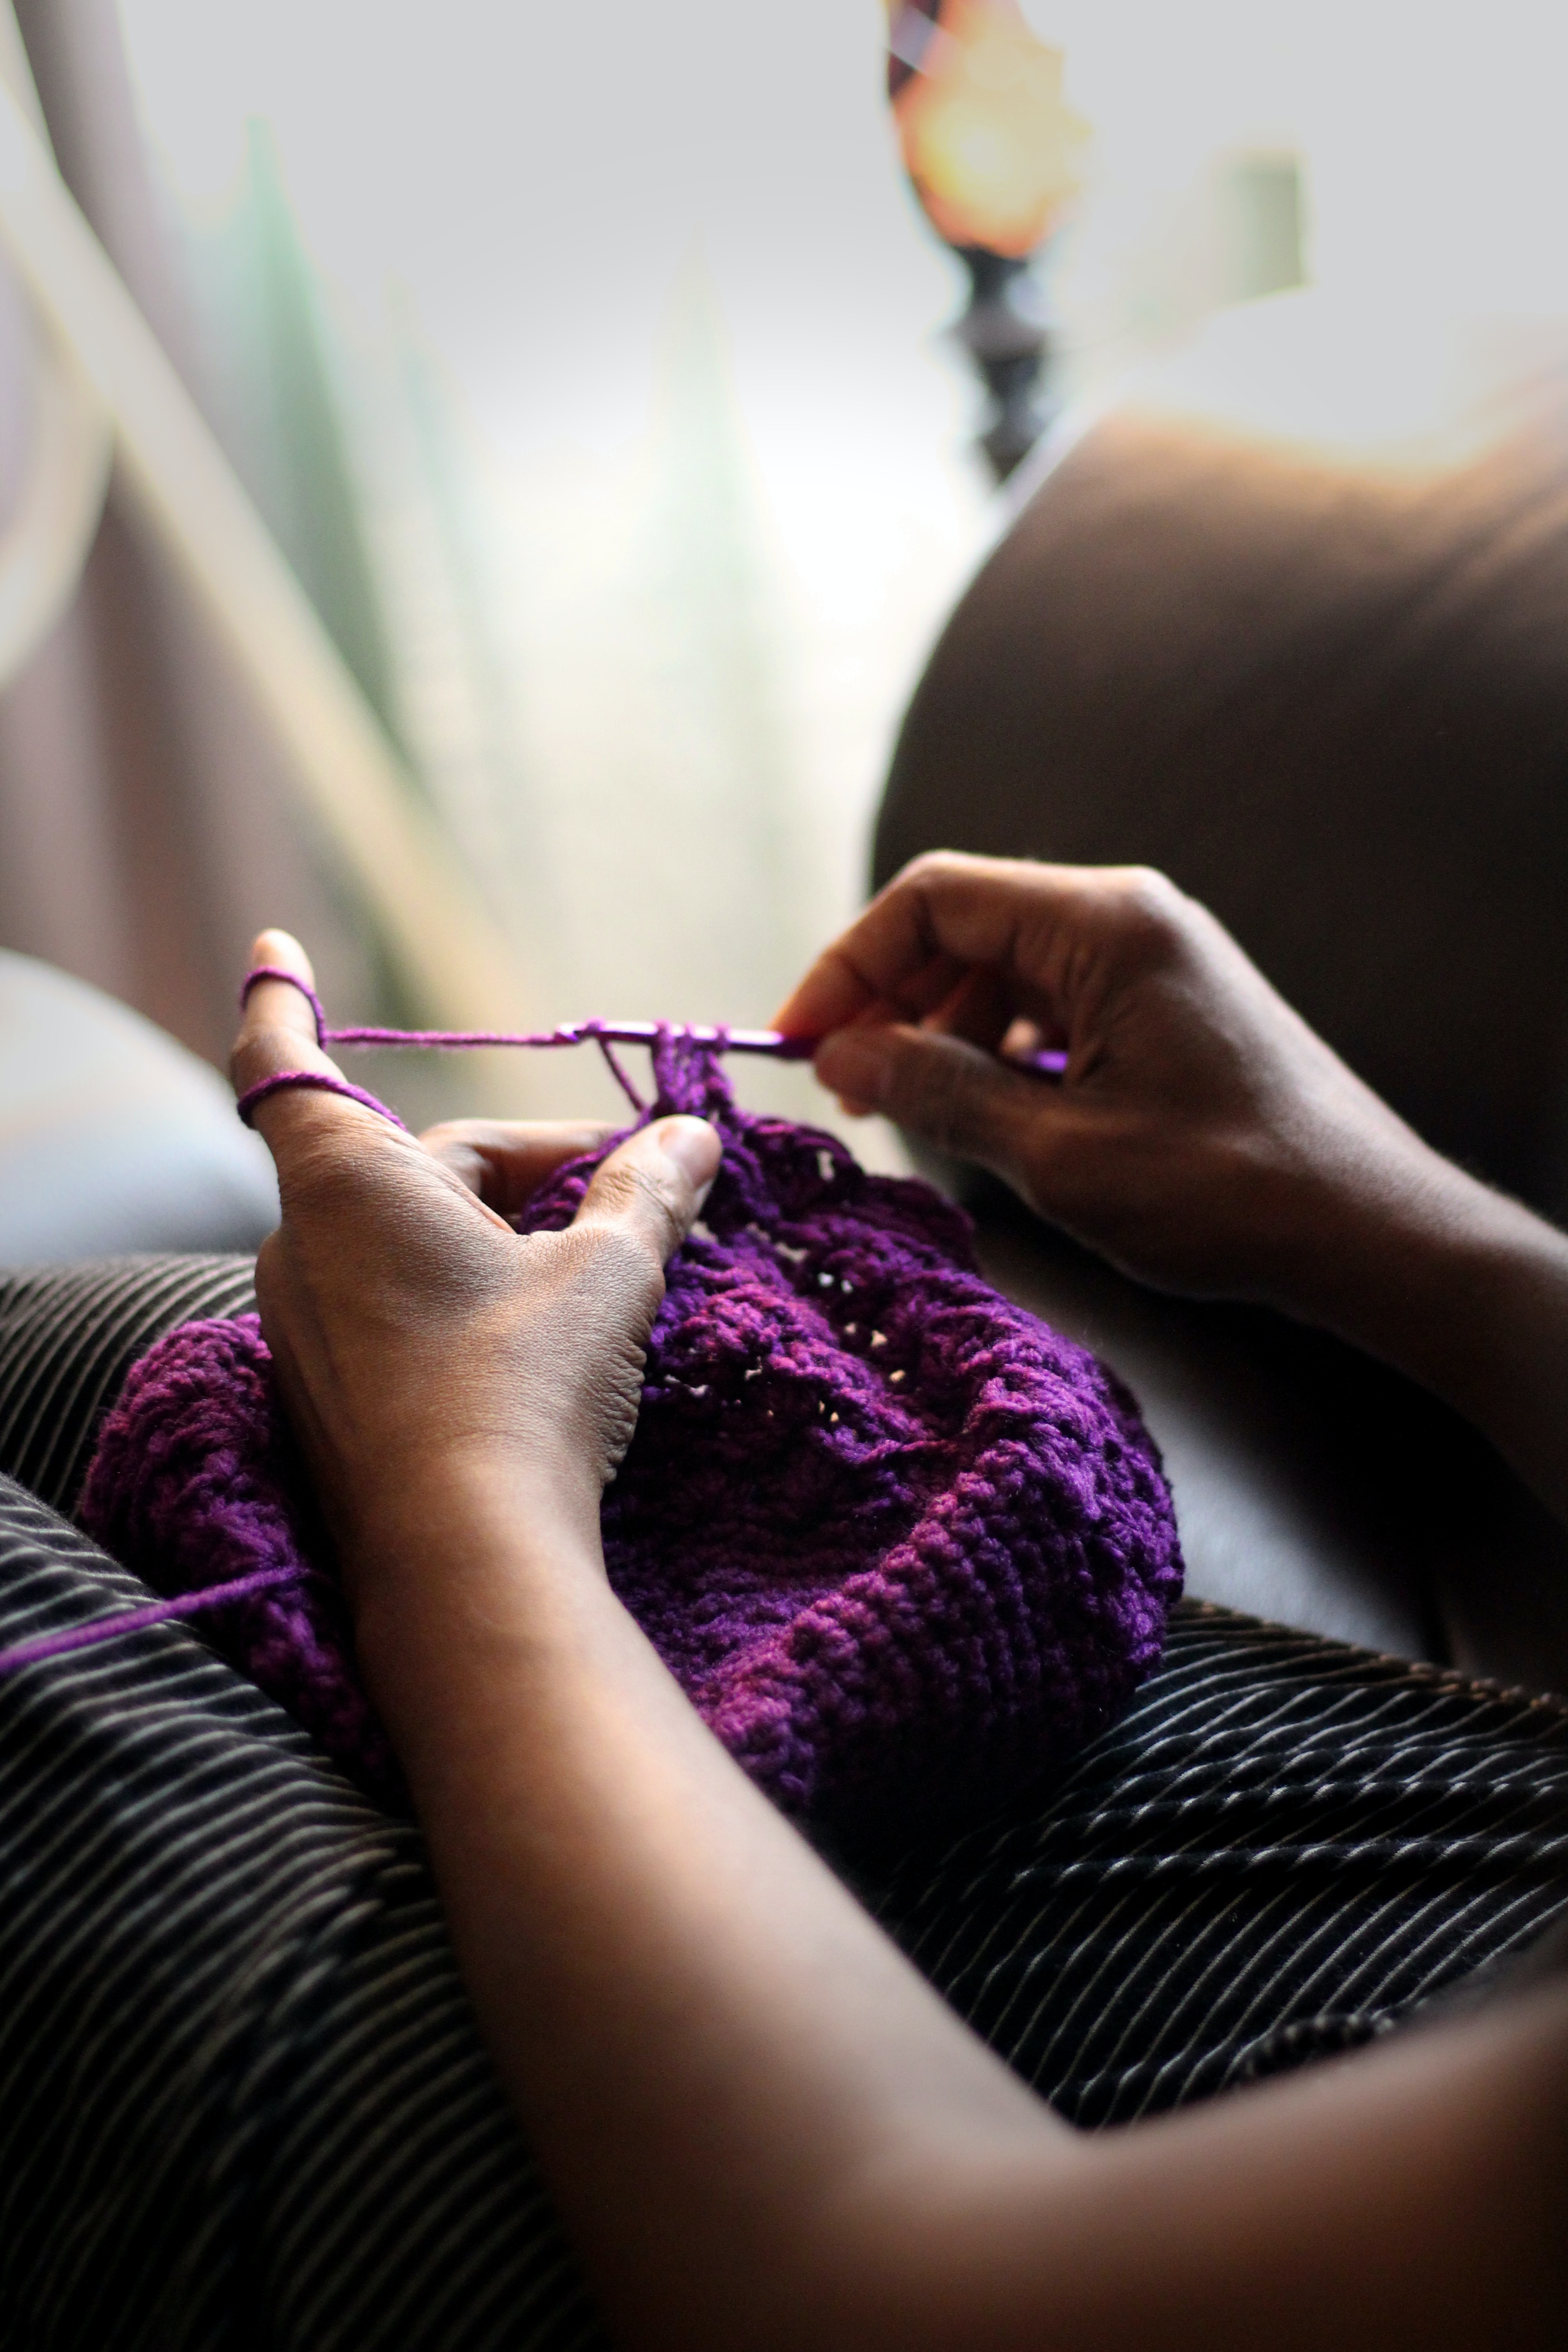 Crochet and Chill 12 Ways Crochet Can Help with Stress and Anxiety